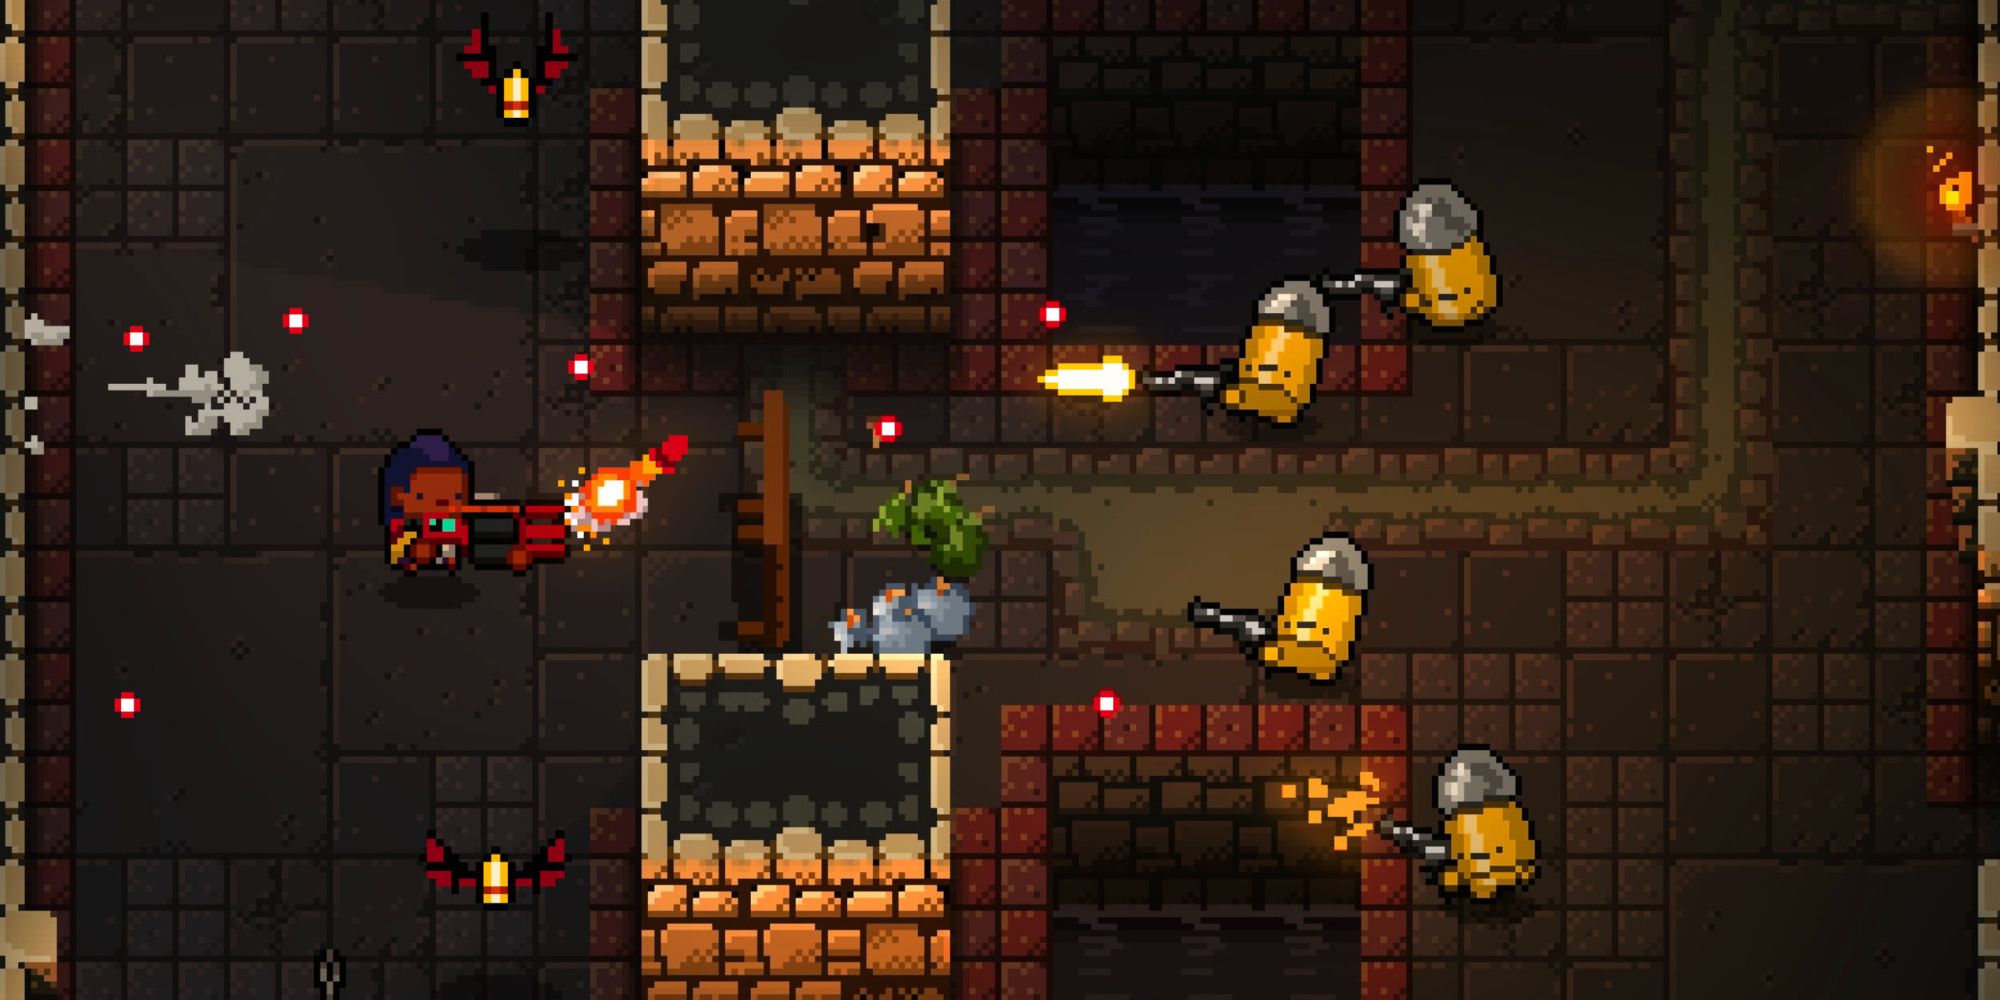 In Enter the Gungeon, a hunter standing behind an overturned table battles his bullet-kin enemies